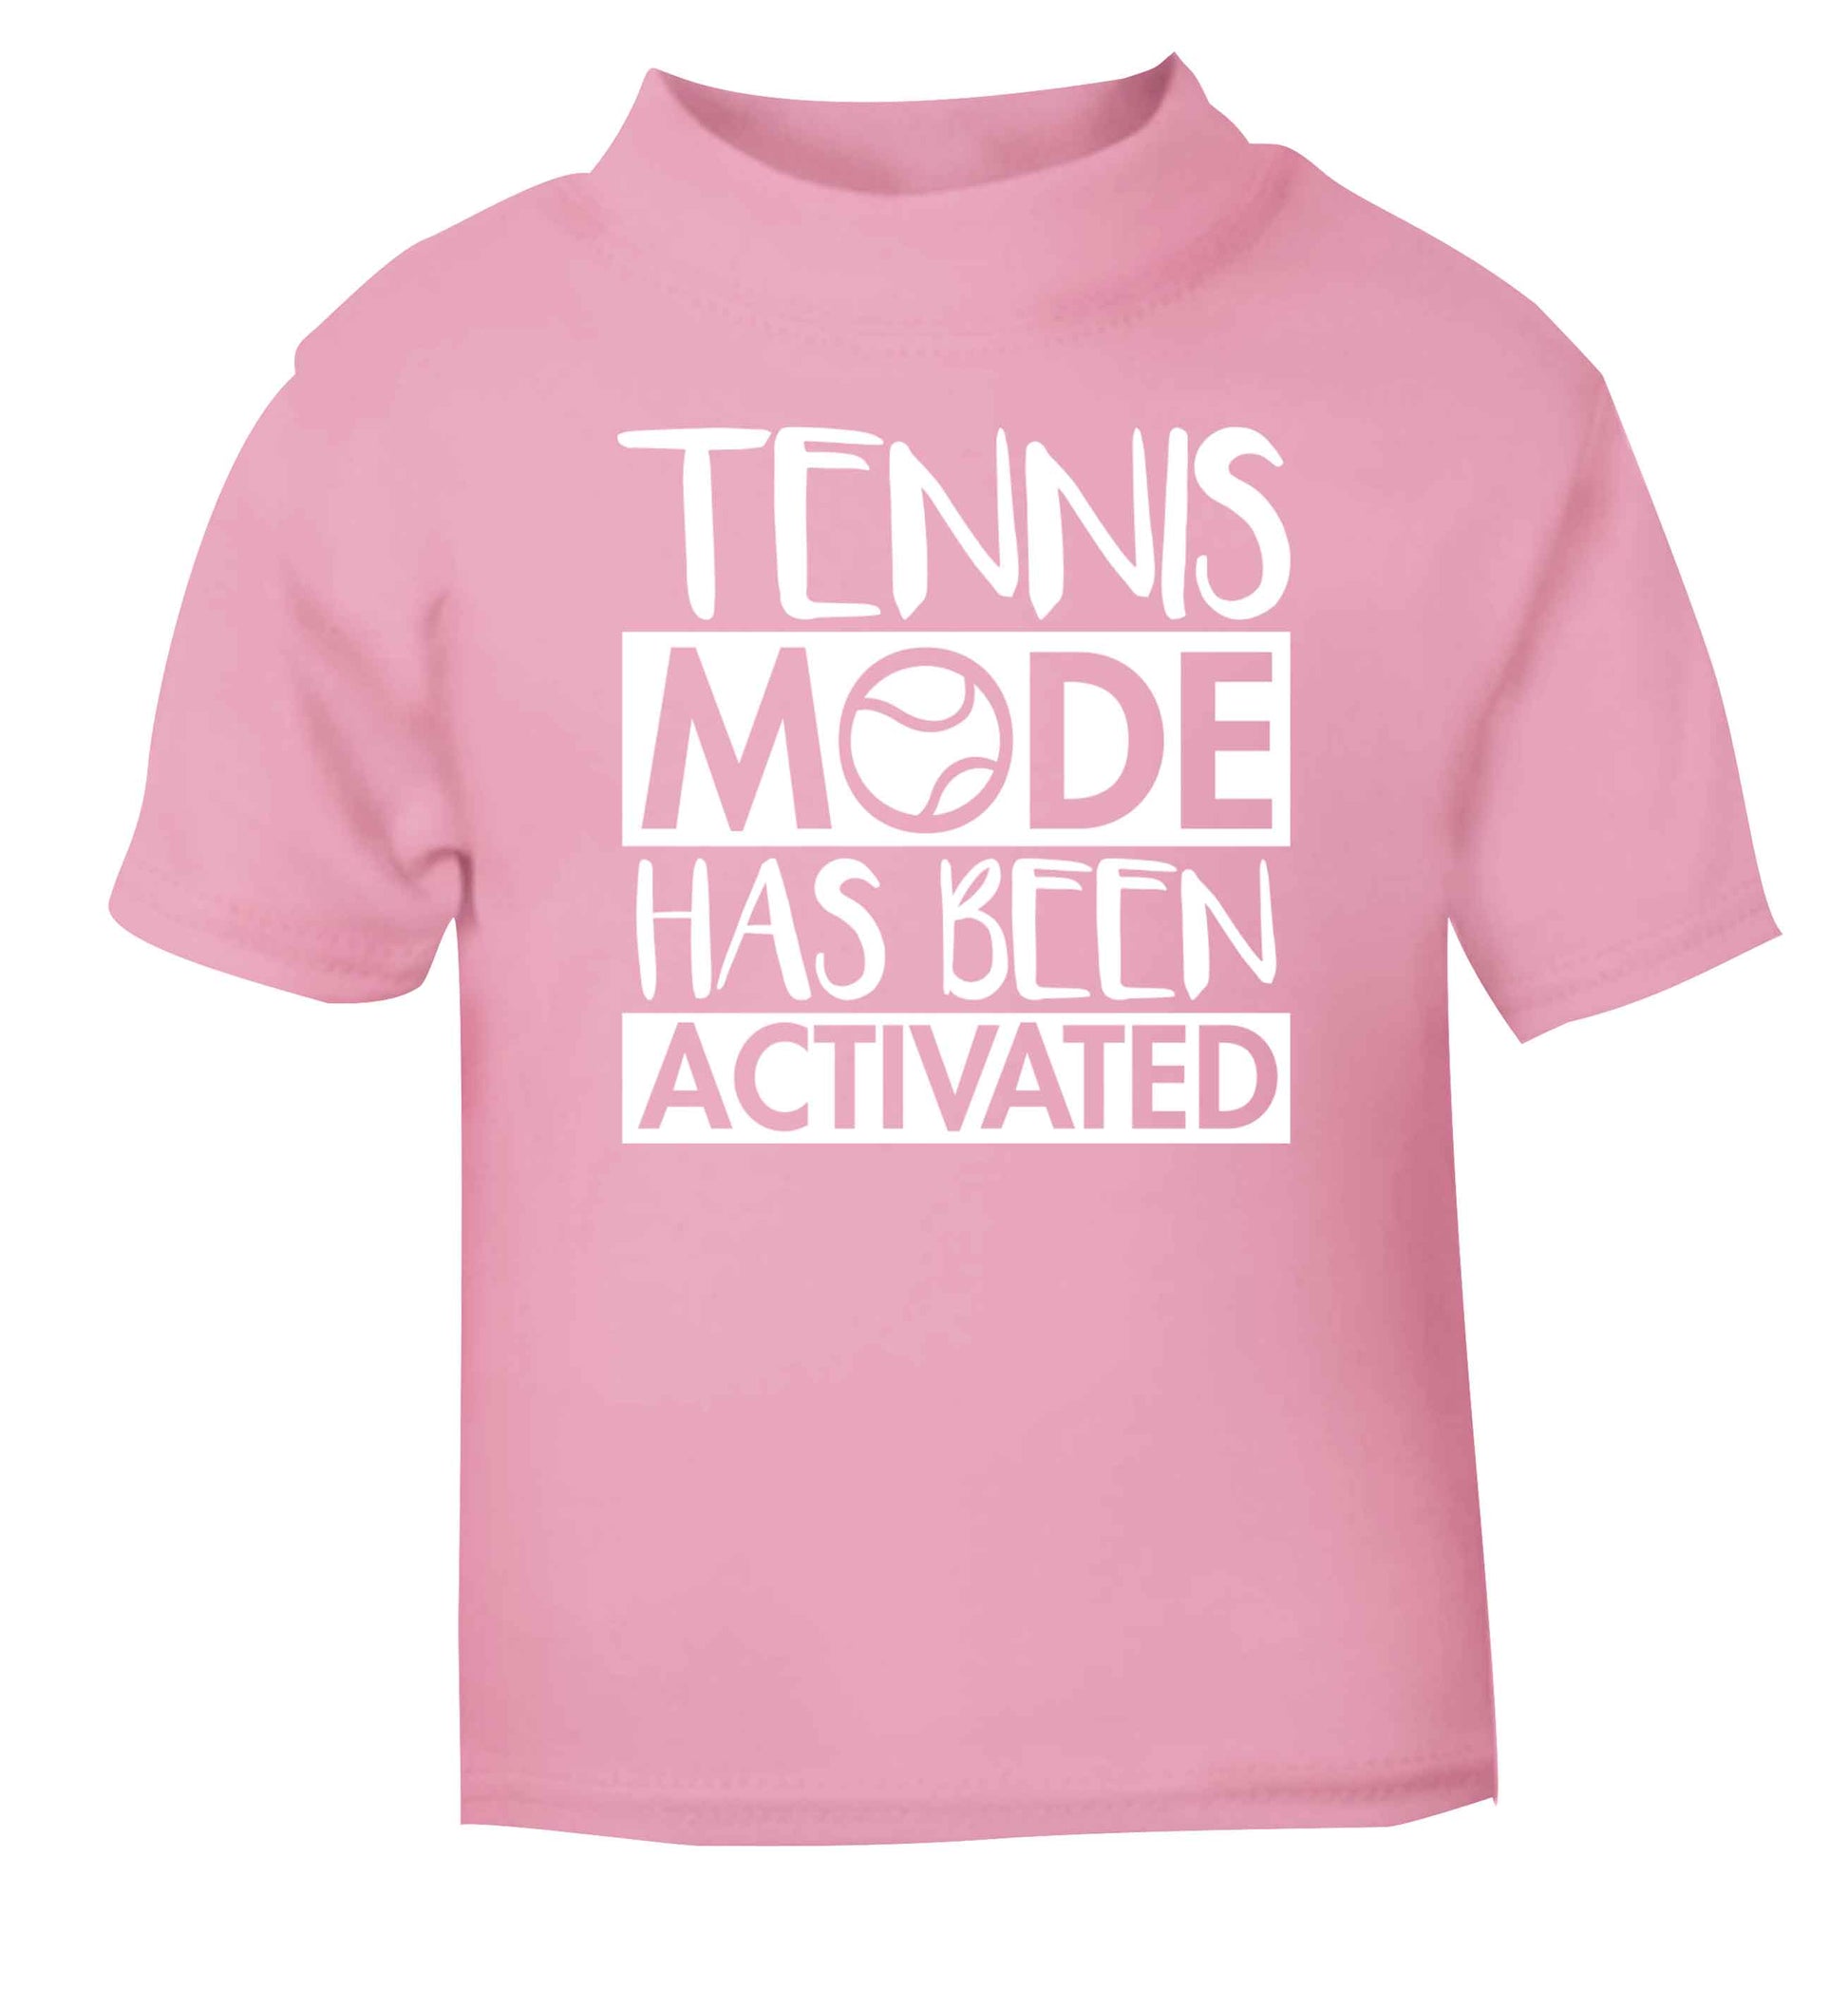 Tennis mode has been activated light pink Baby Toddler Tshirt 2 Years